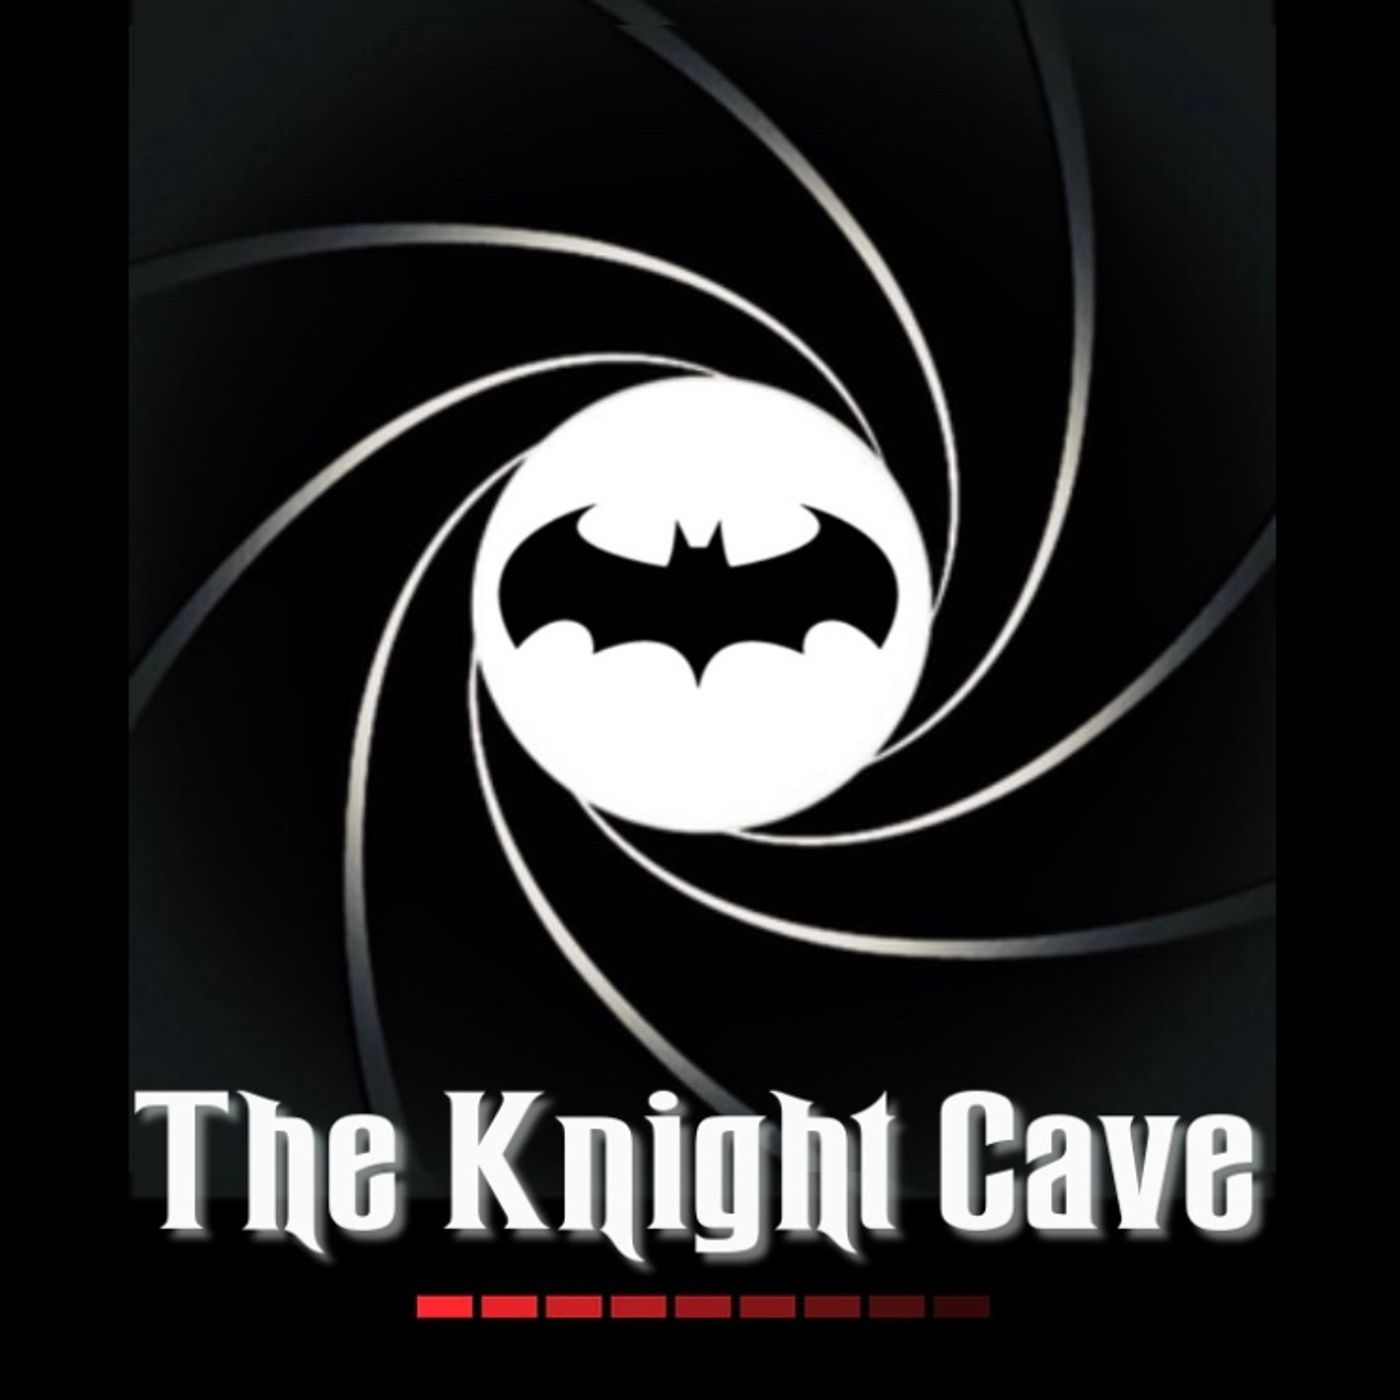 The Knight Cave